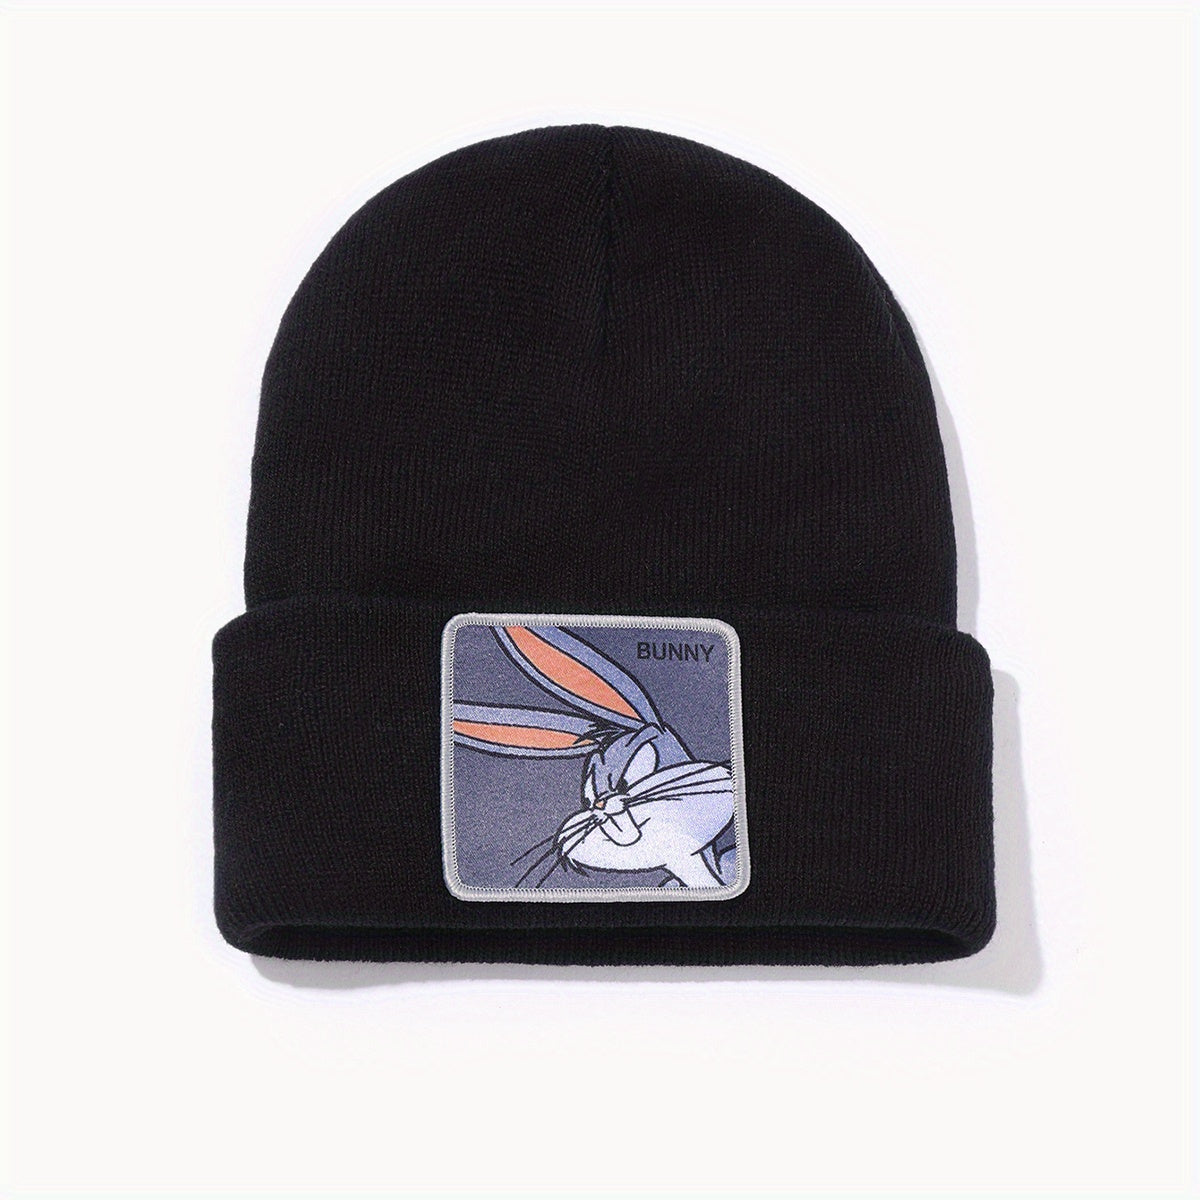 MINJI Cartoon Bunny Graphic Beanie Trendy Embroidery Candy Color Knit Hats